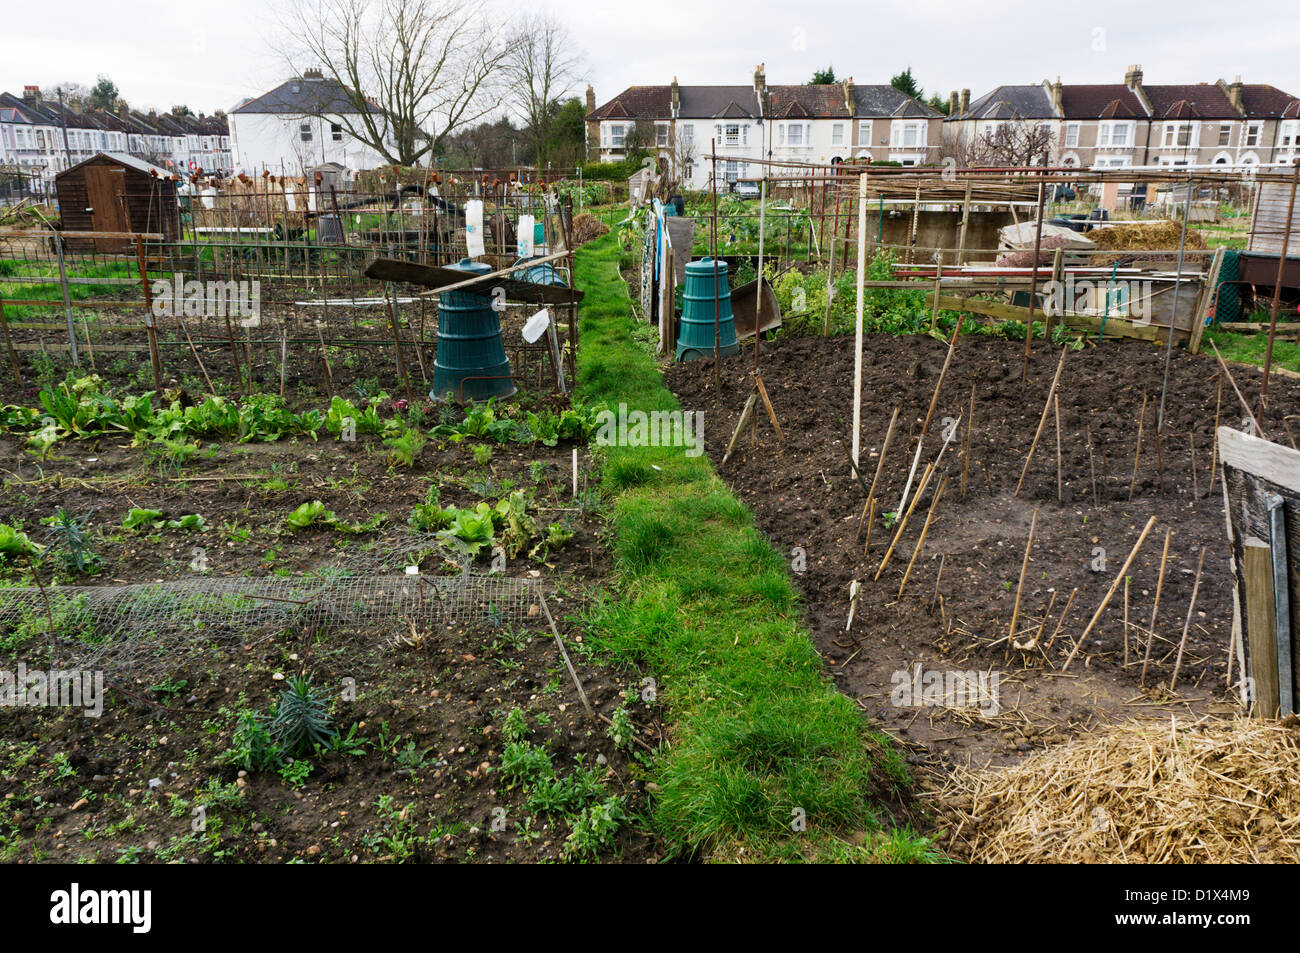 Hazelbank Allotments in the middle of housing in south London. Stock Photo